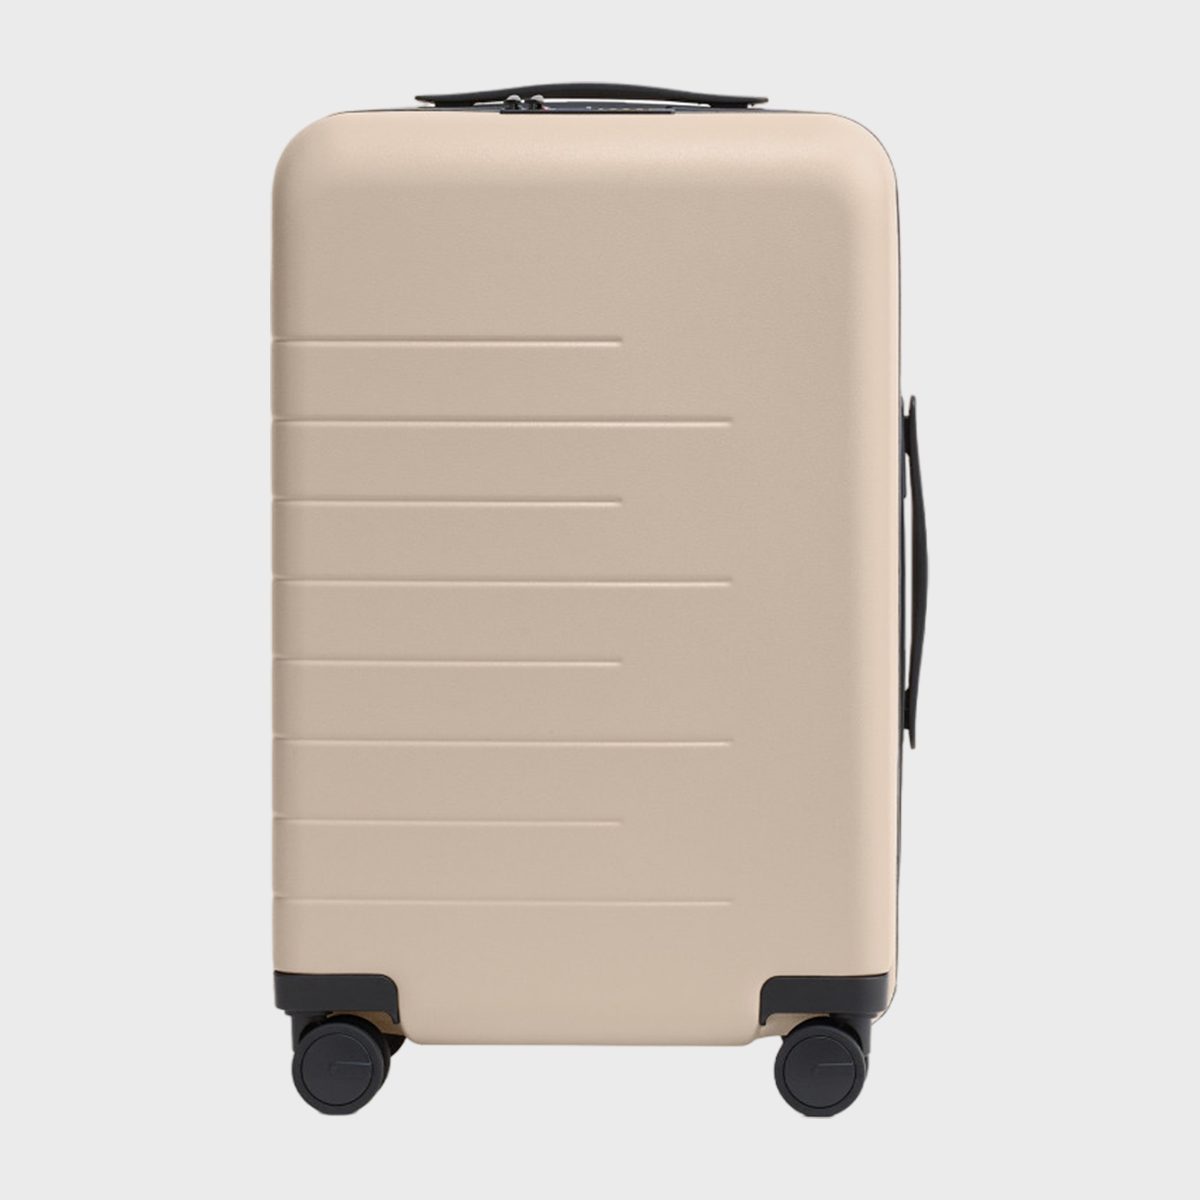 A Quince Suitcase Is the Affordable Luggage You Need